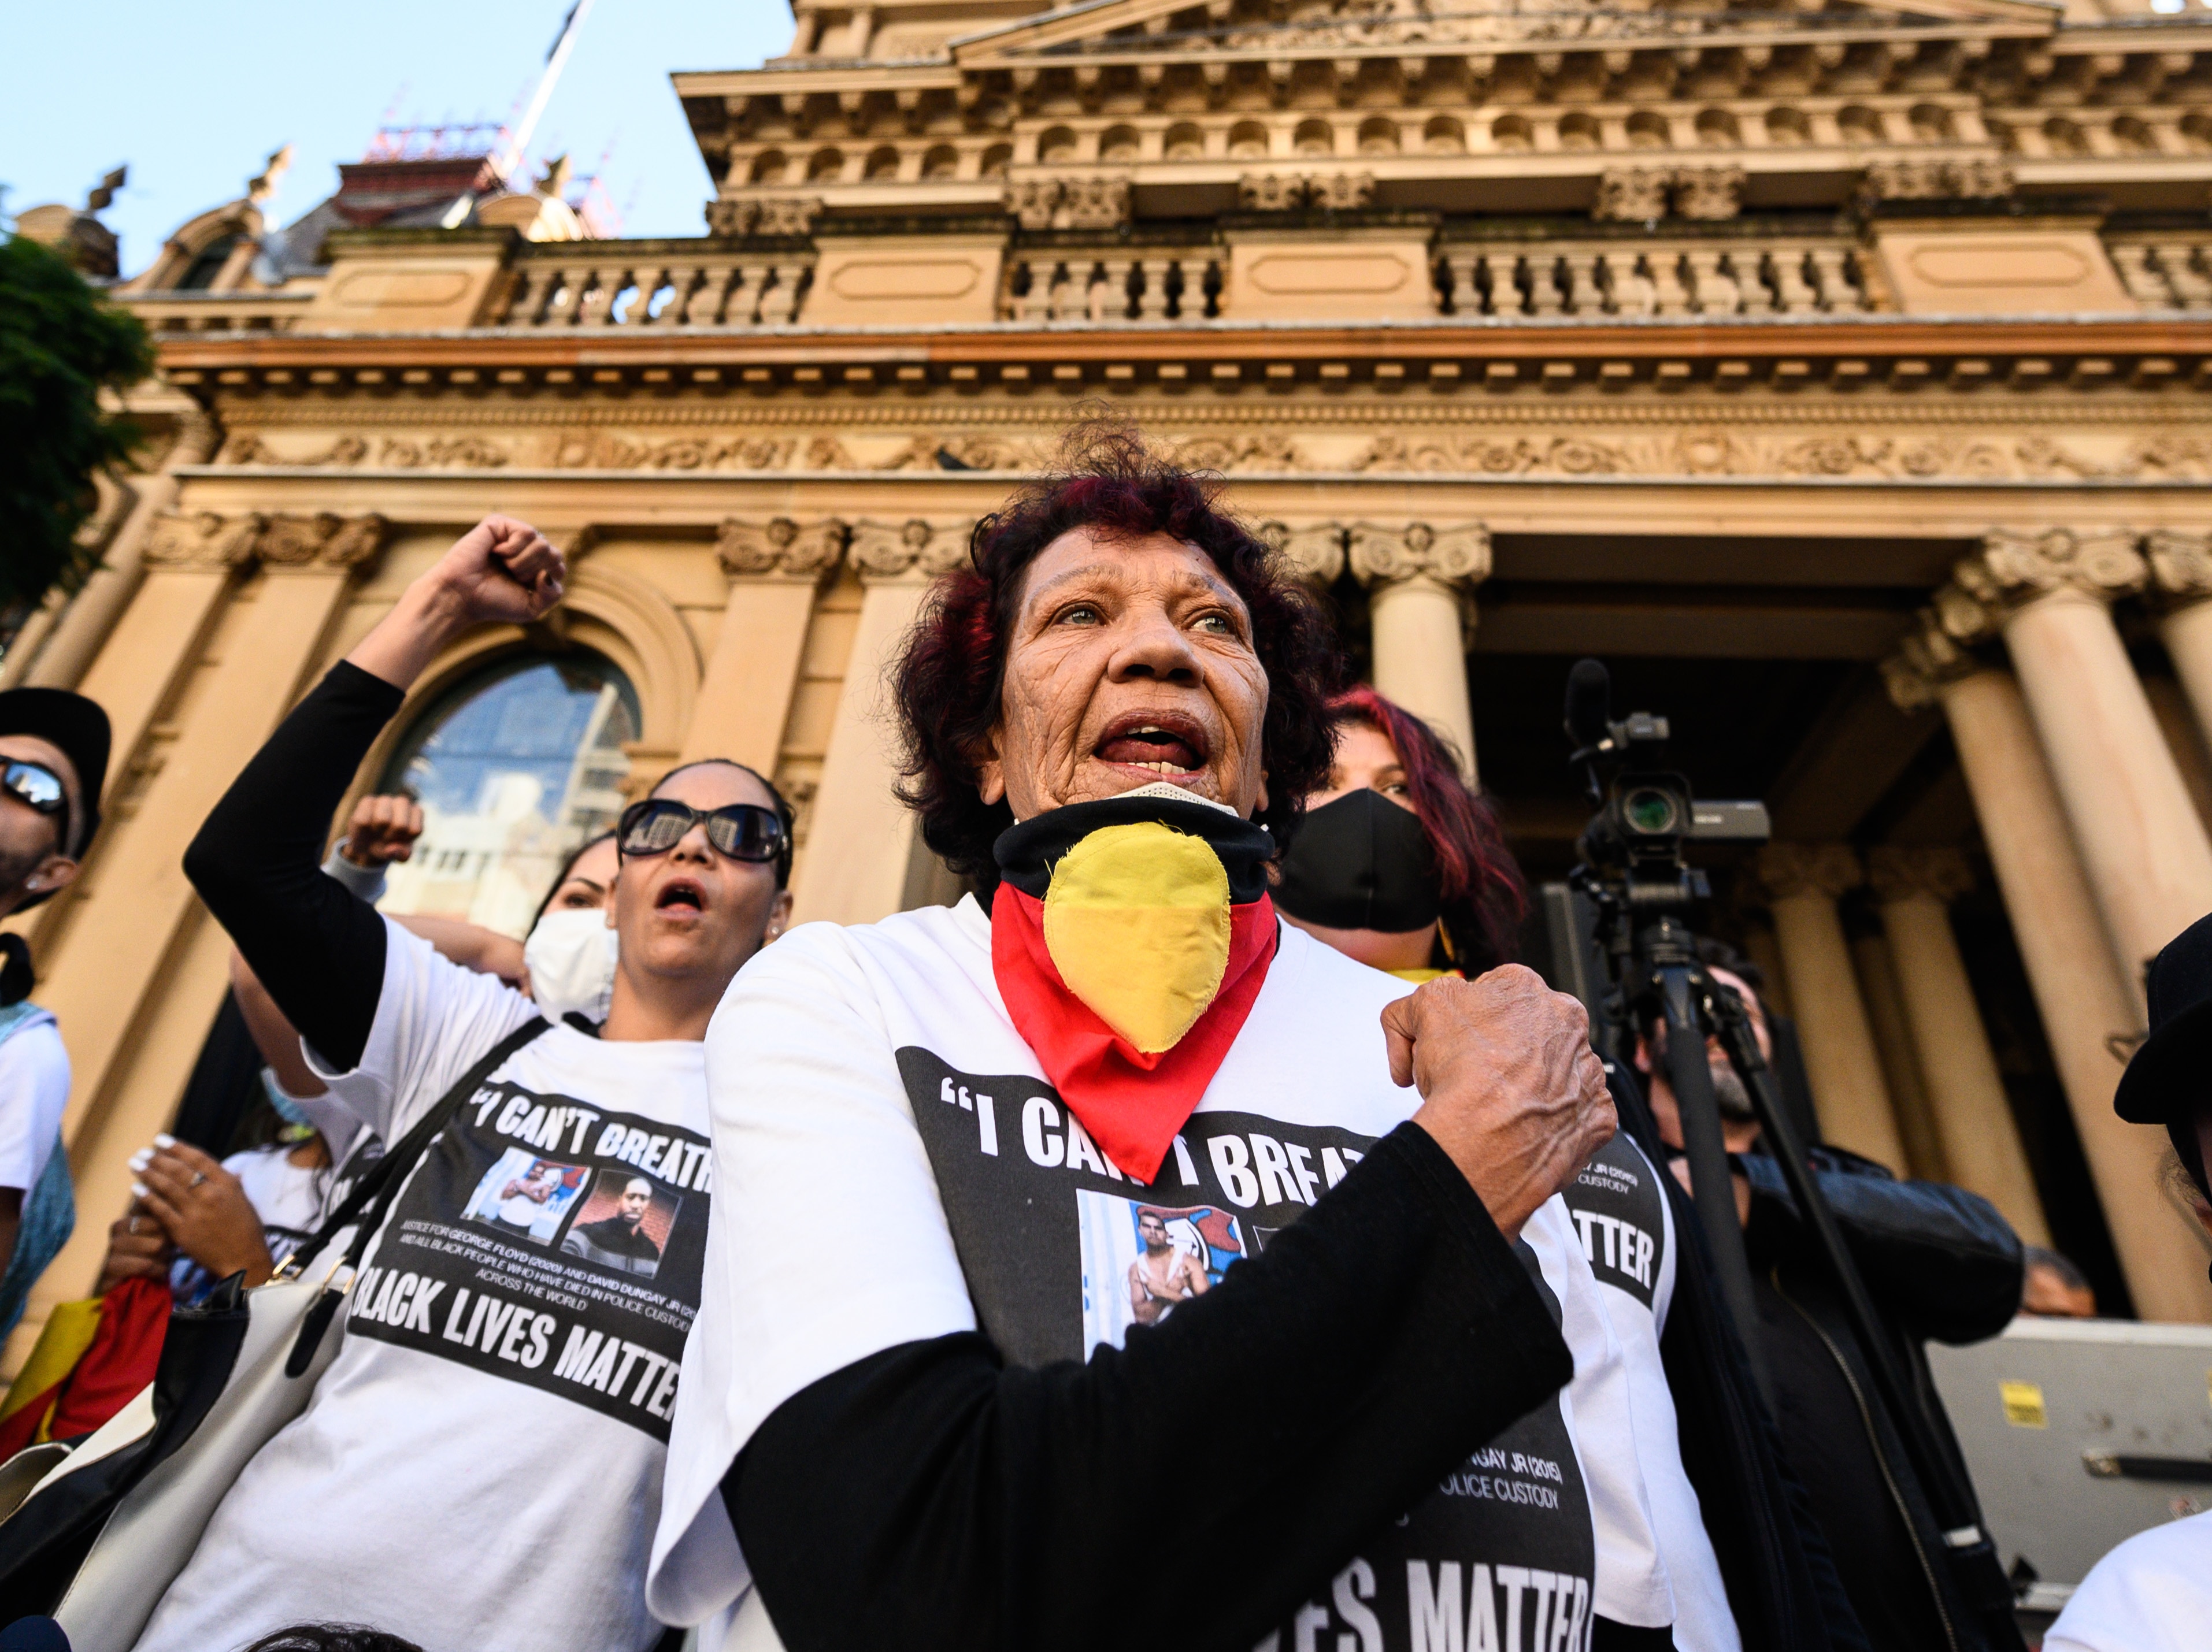 Leetona Dungay, whose son David Dungay Jr died in Long Bay jail in 2015, at the Sydney Black Lives Matter protest.